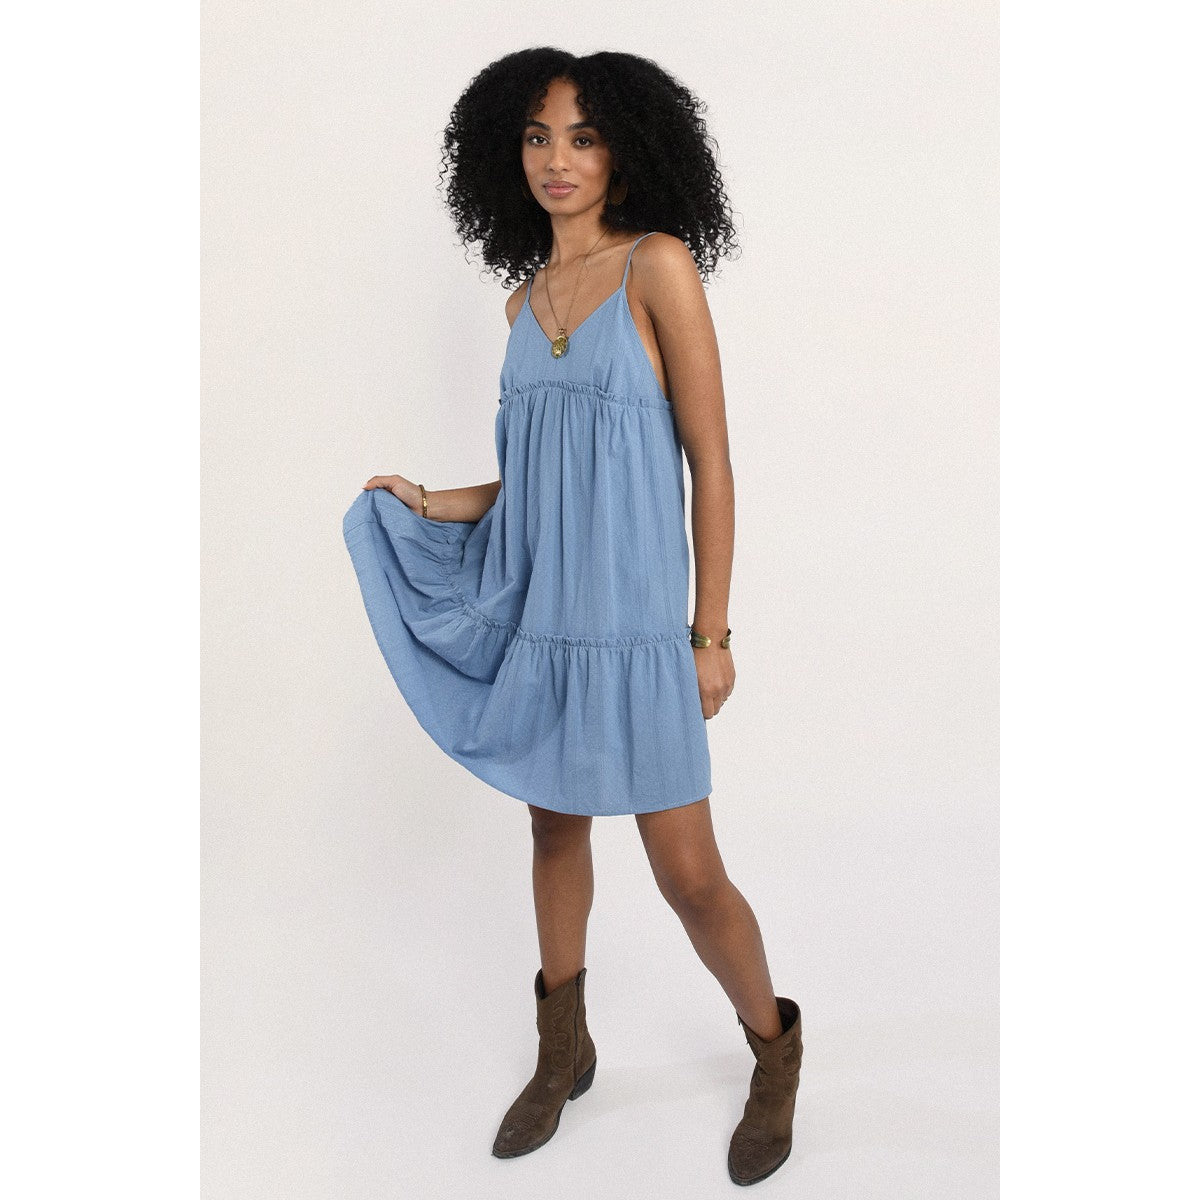 Full body view of the Mini Babydoll Dress showing the light denim color and length.